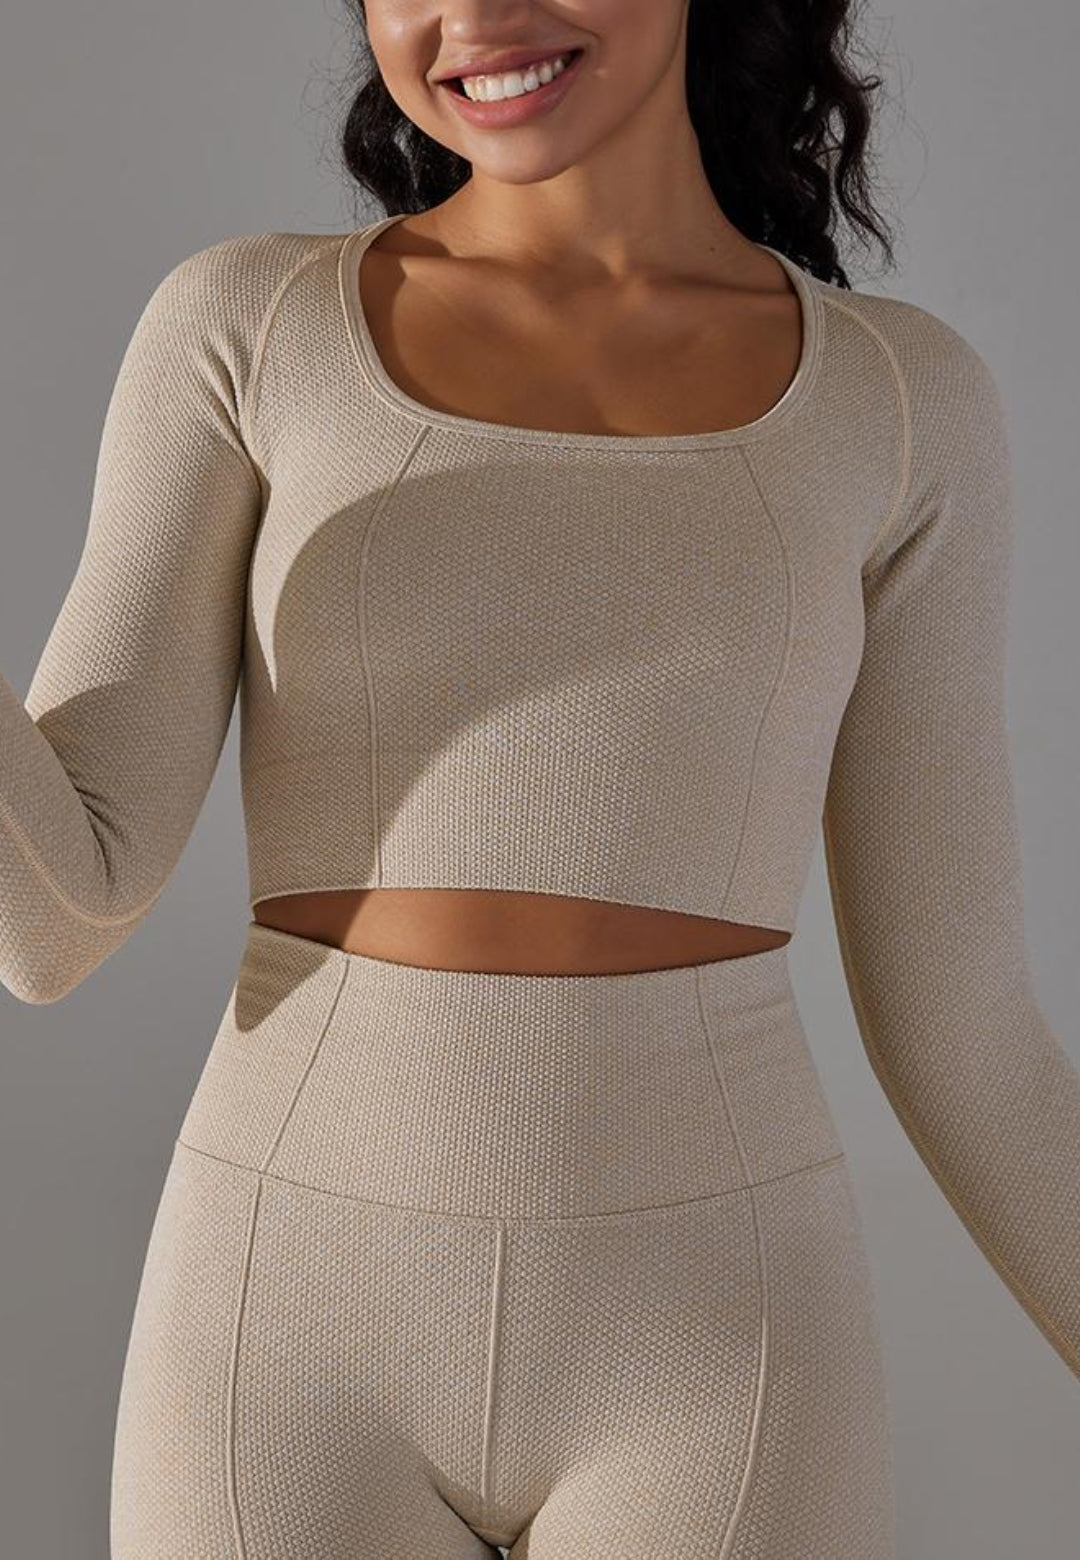 Square Neck Textured Sports Top